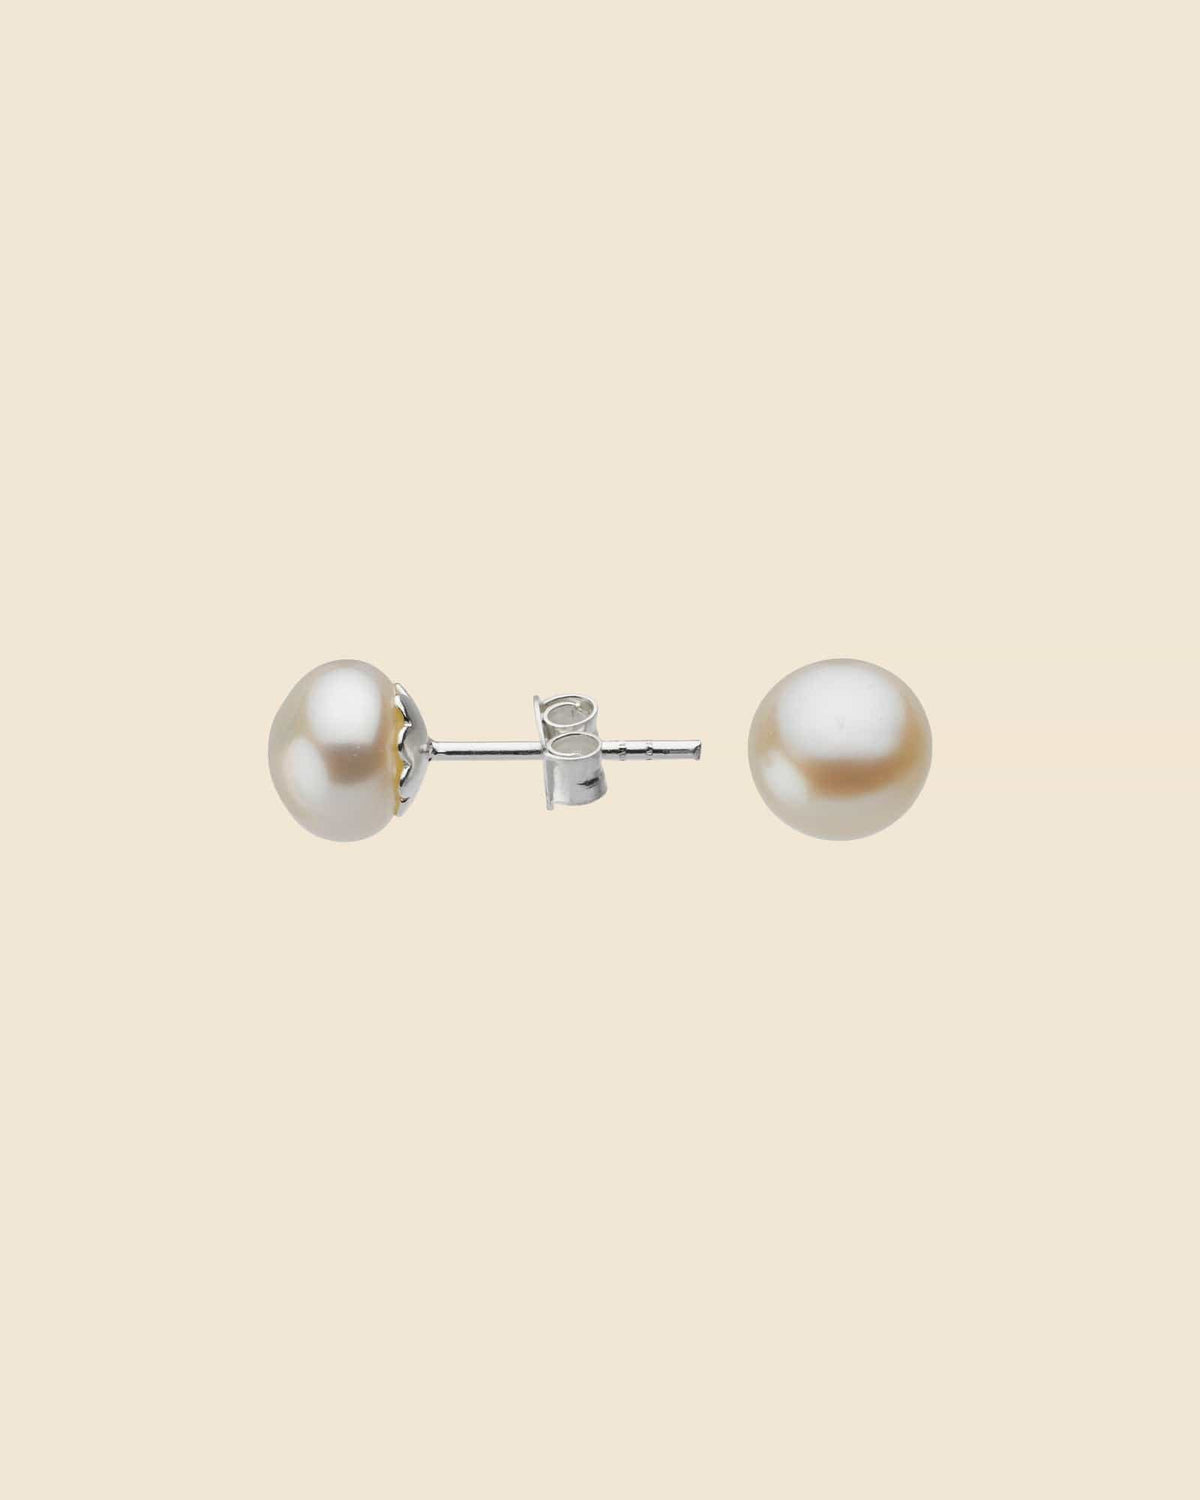 8mm Ivory Freshwater Pearl and Sterling Silver Studs